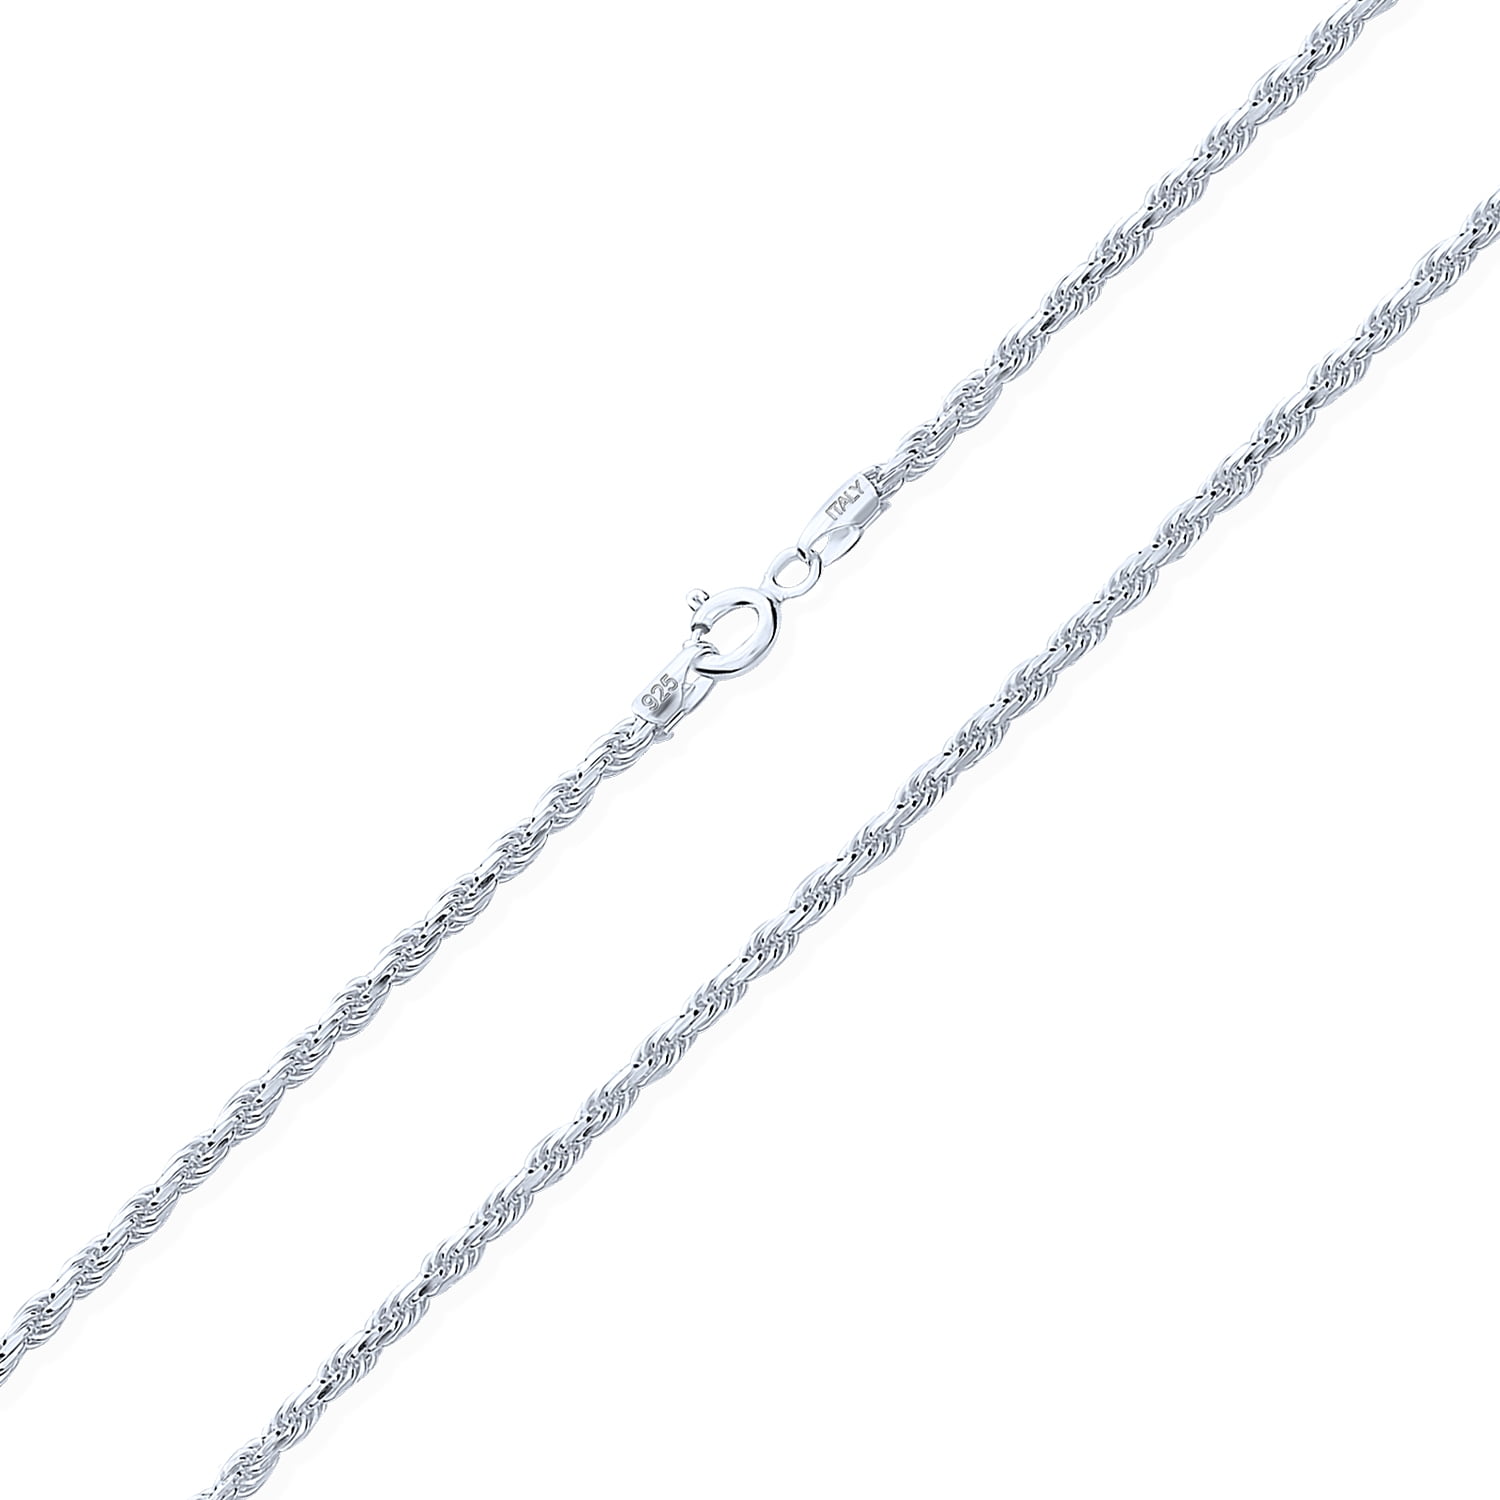 16-30 inch Sterling Silver Herringbone Chain Necklace & Bracelets 2mm 14 mm Beveled Edges Nickel Free Italy